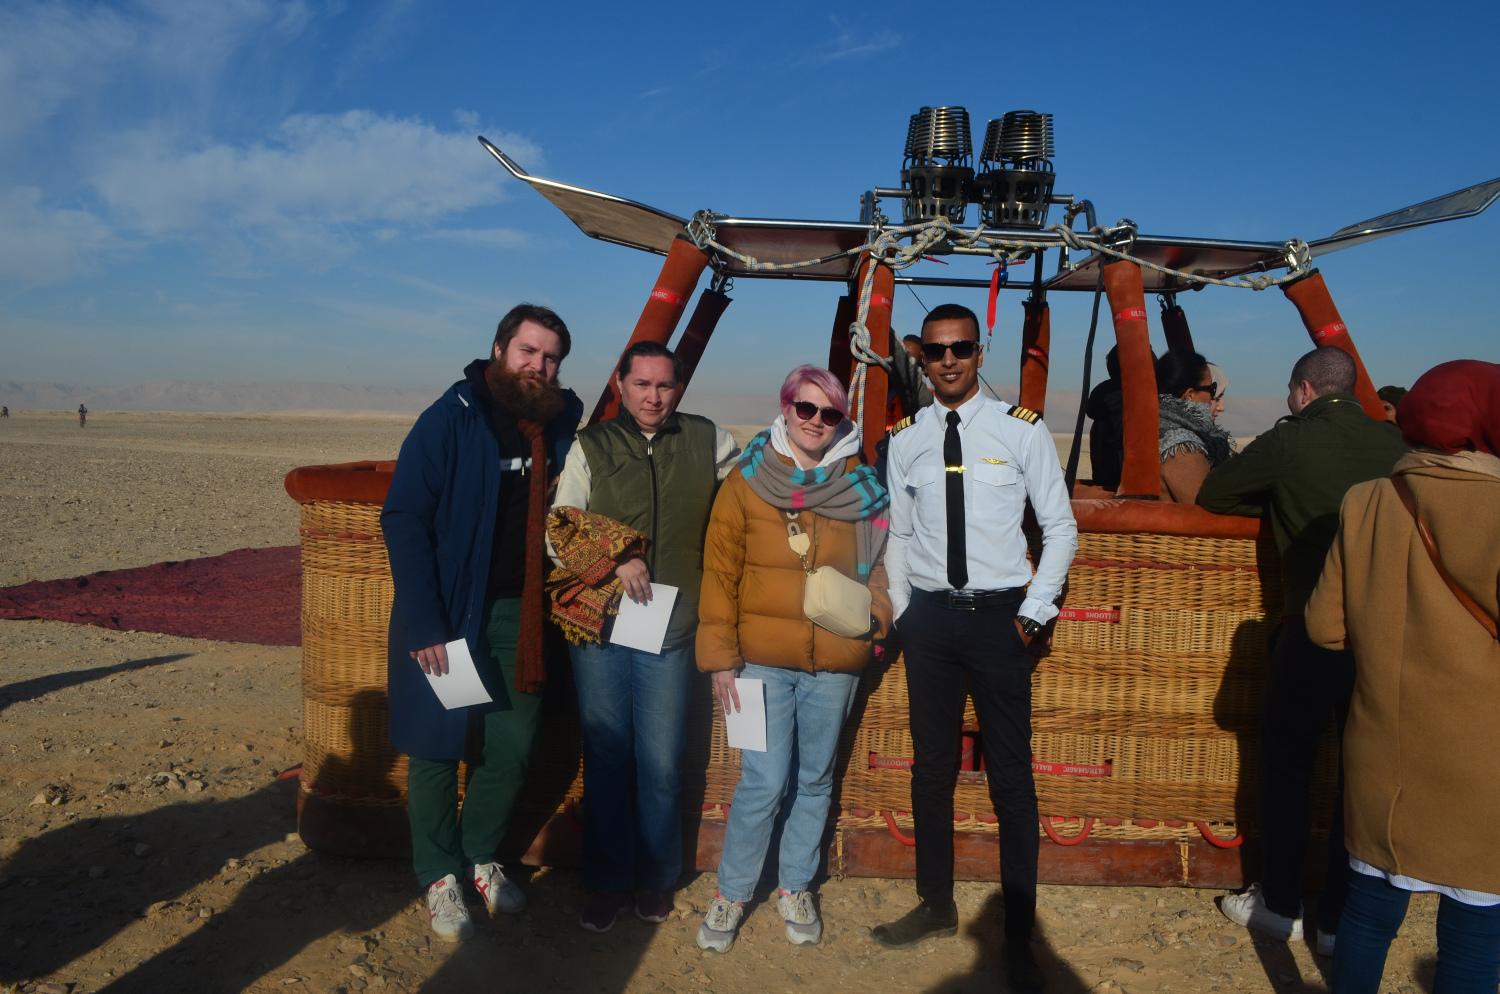 
Excursion of hot air balloon over Luxor temples